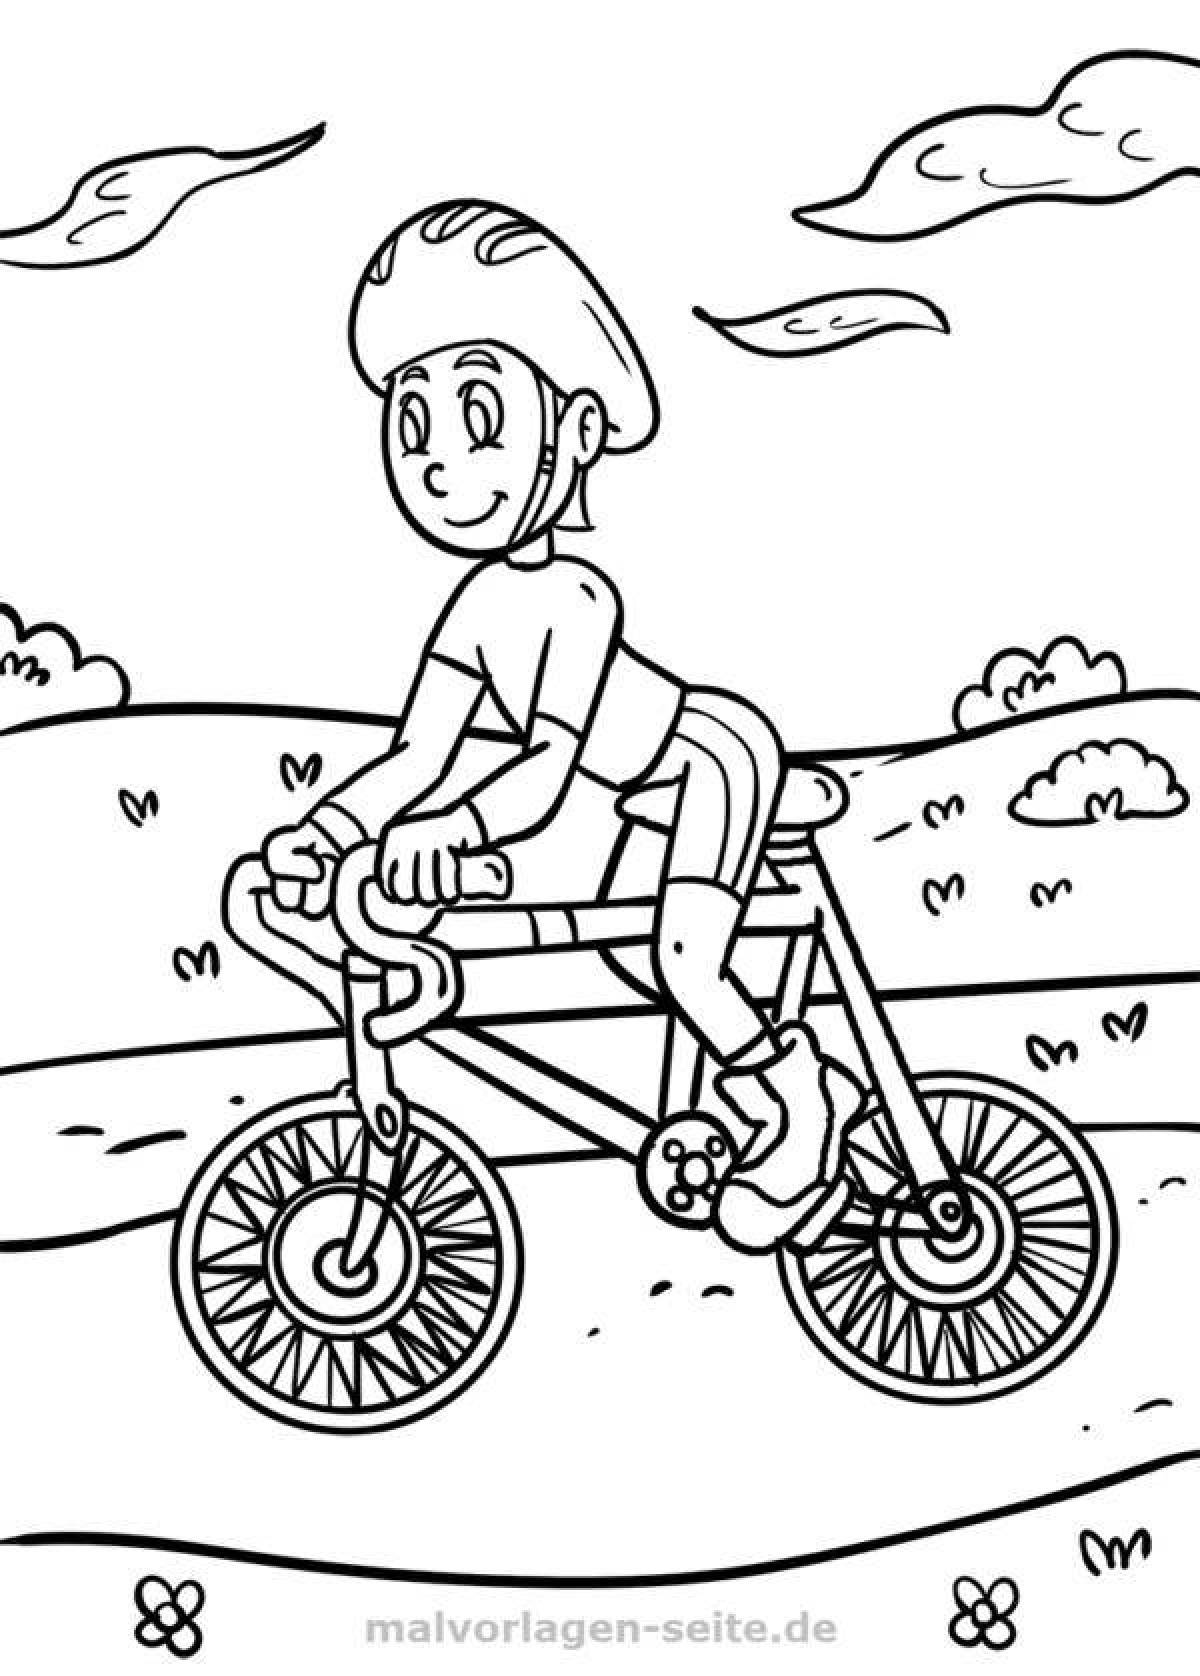 Bright sports coloring pages for kids